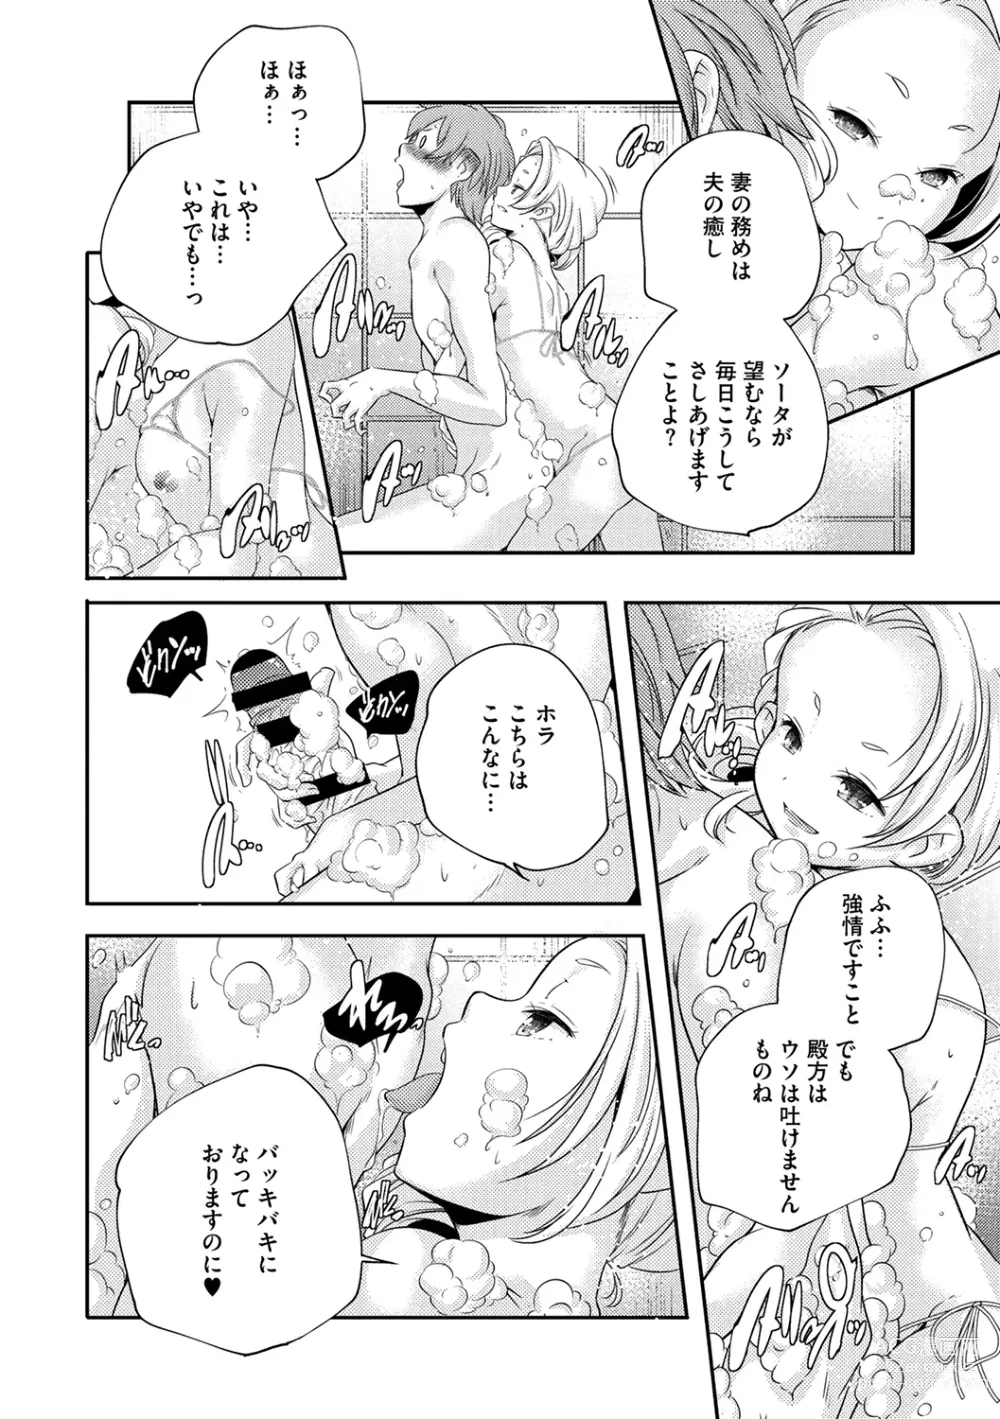 Page 30 of manga LQ -Little Queen- Vol. 52